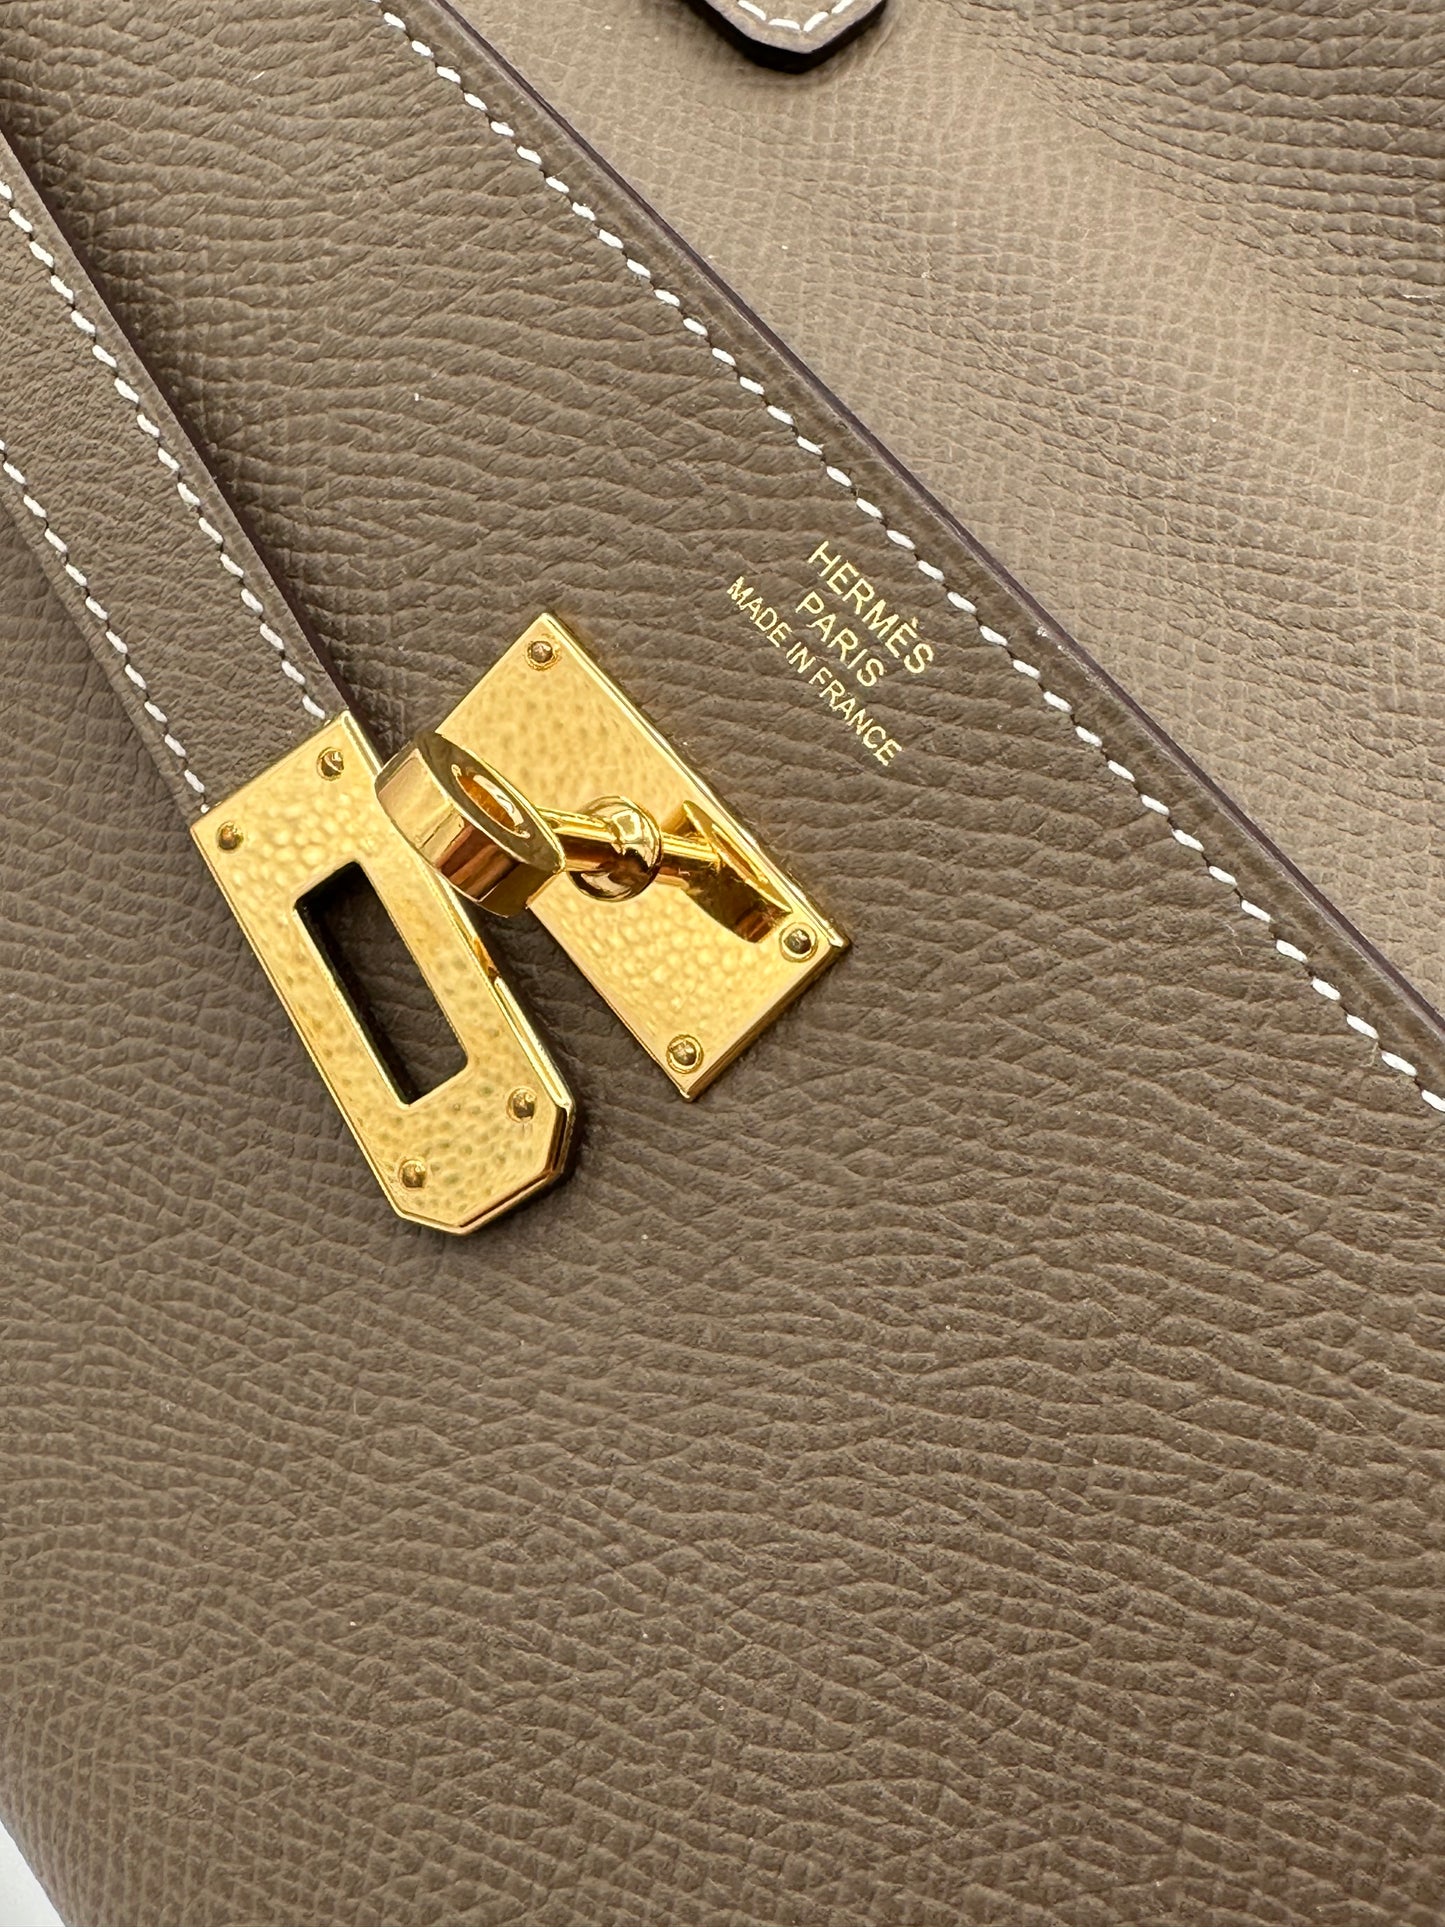 Hermes Kelly To Go